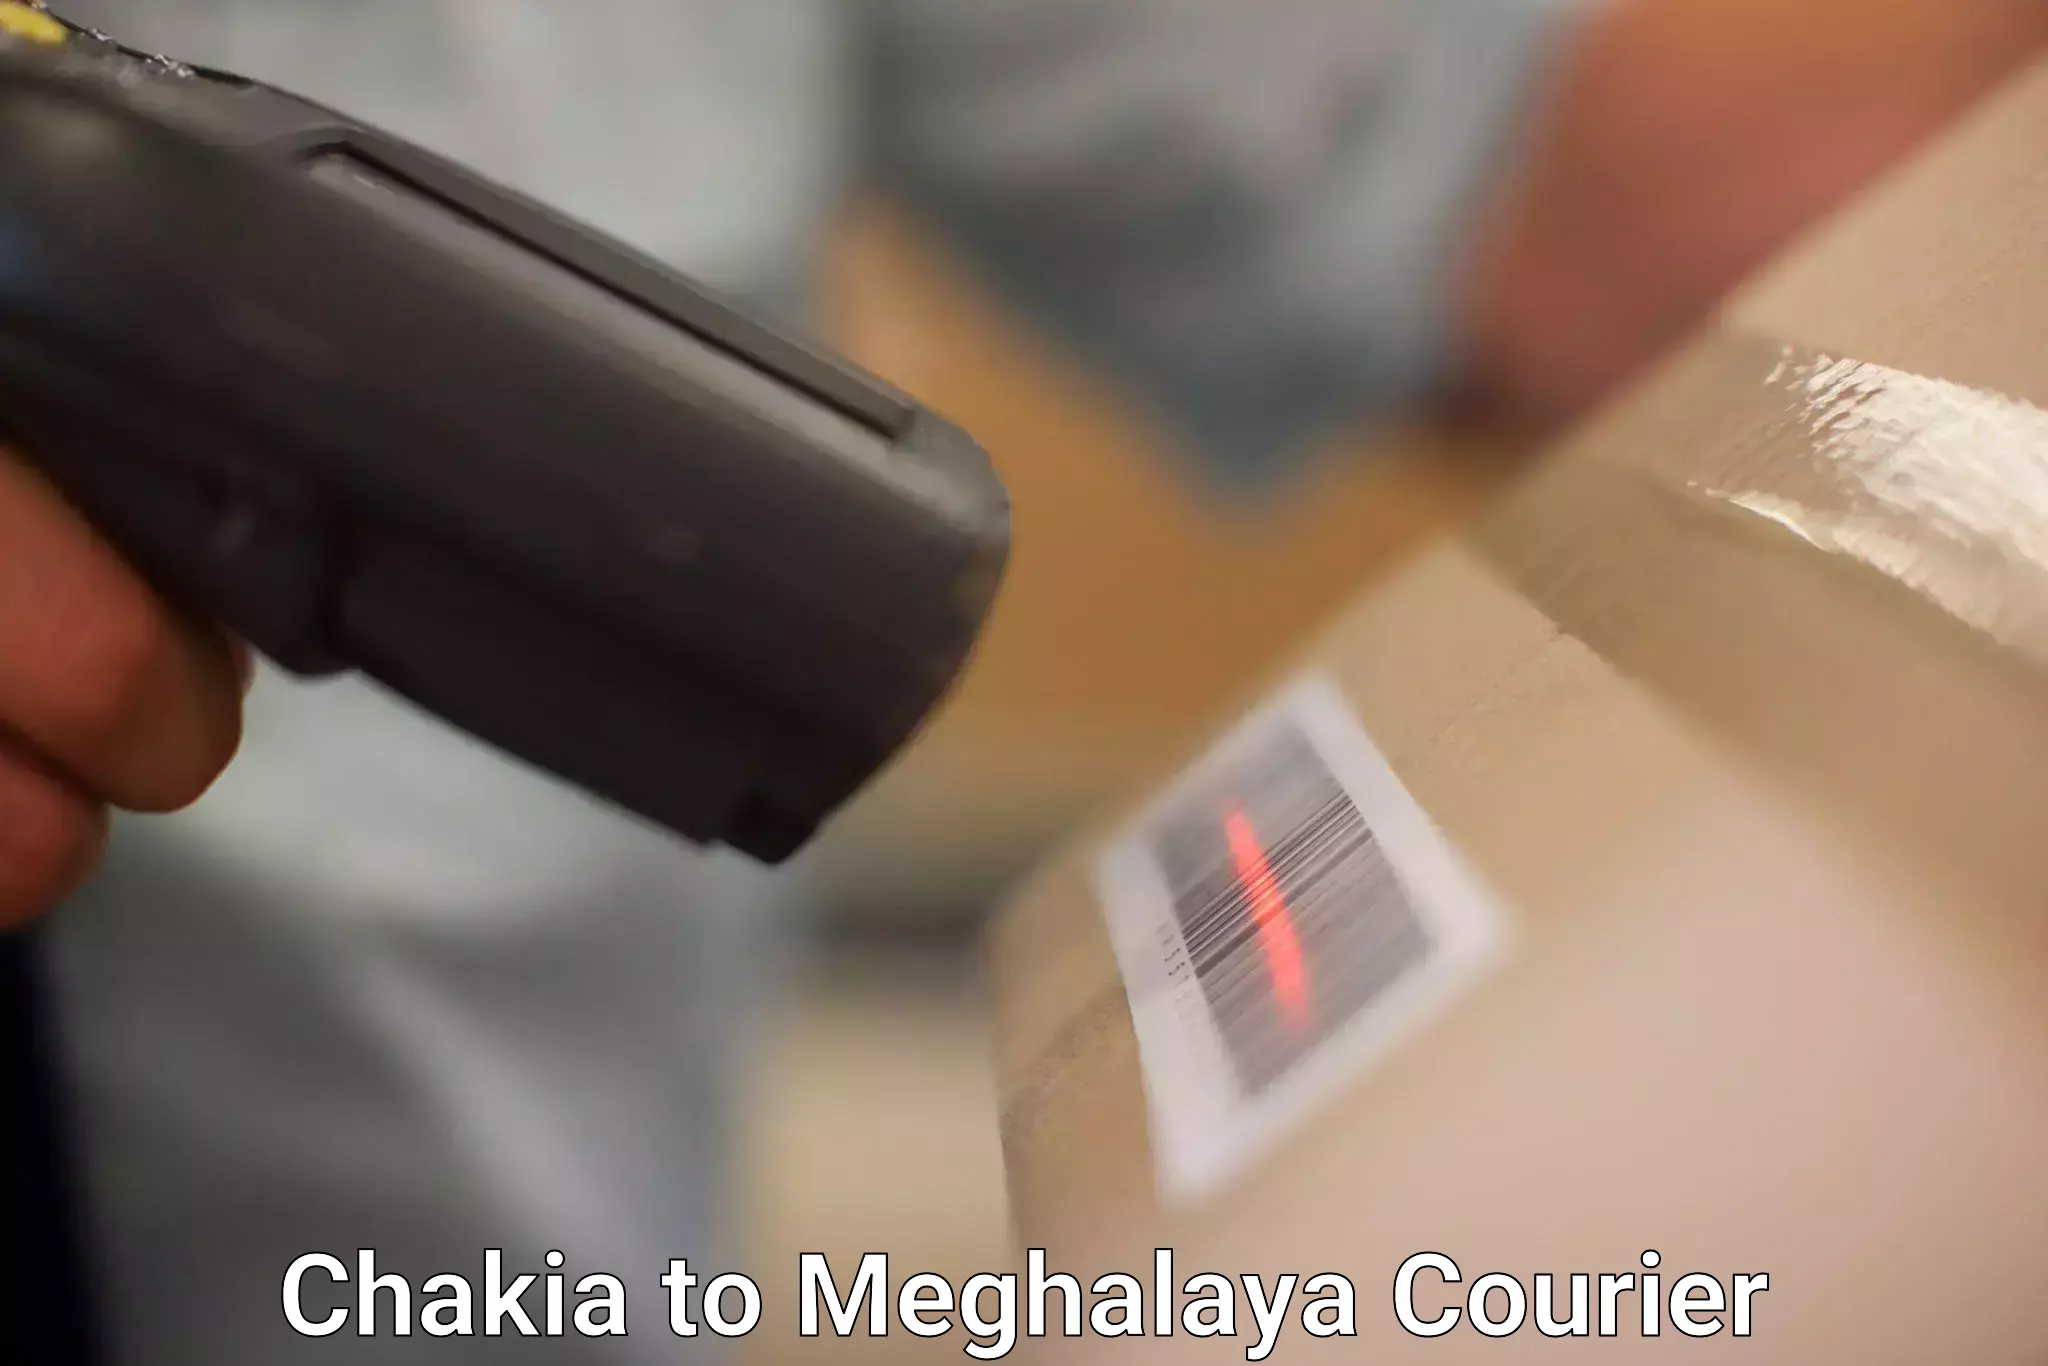 Reliable delivery network Chakia to Meghalaya